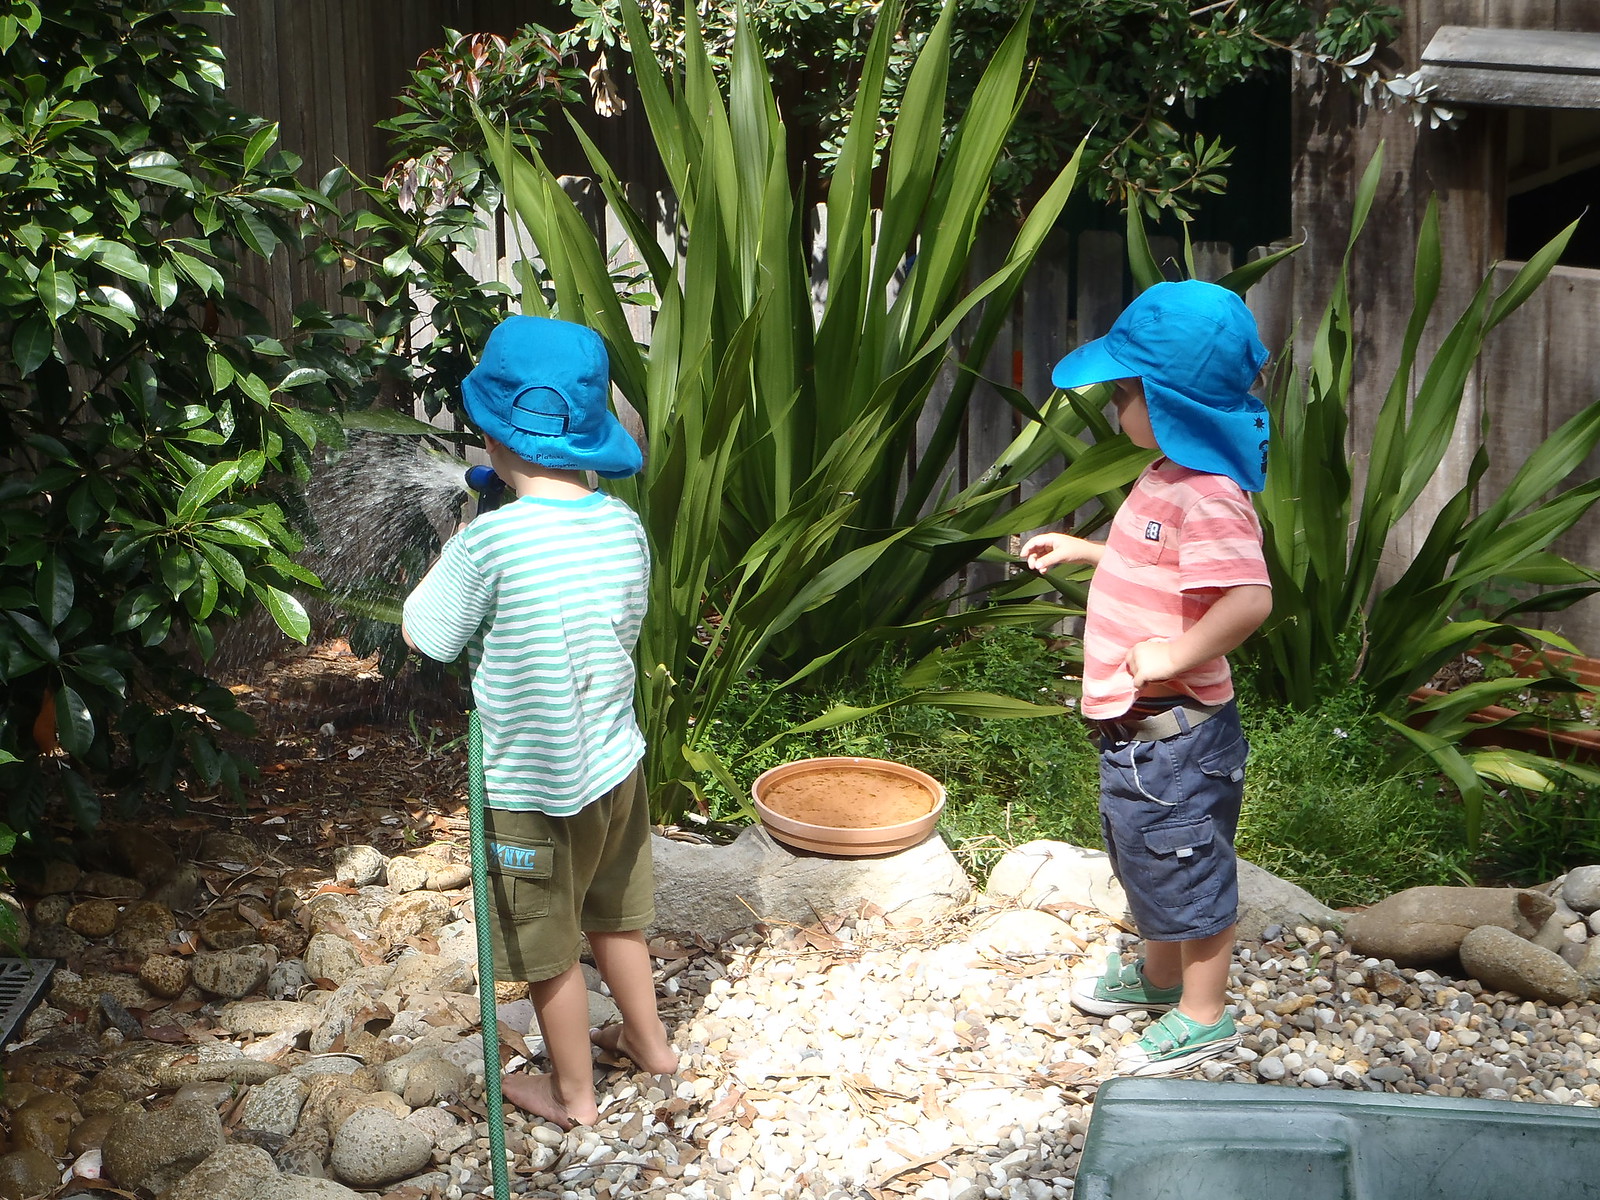 taking turns to water the garden